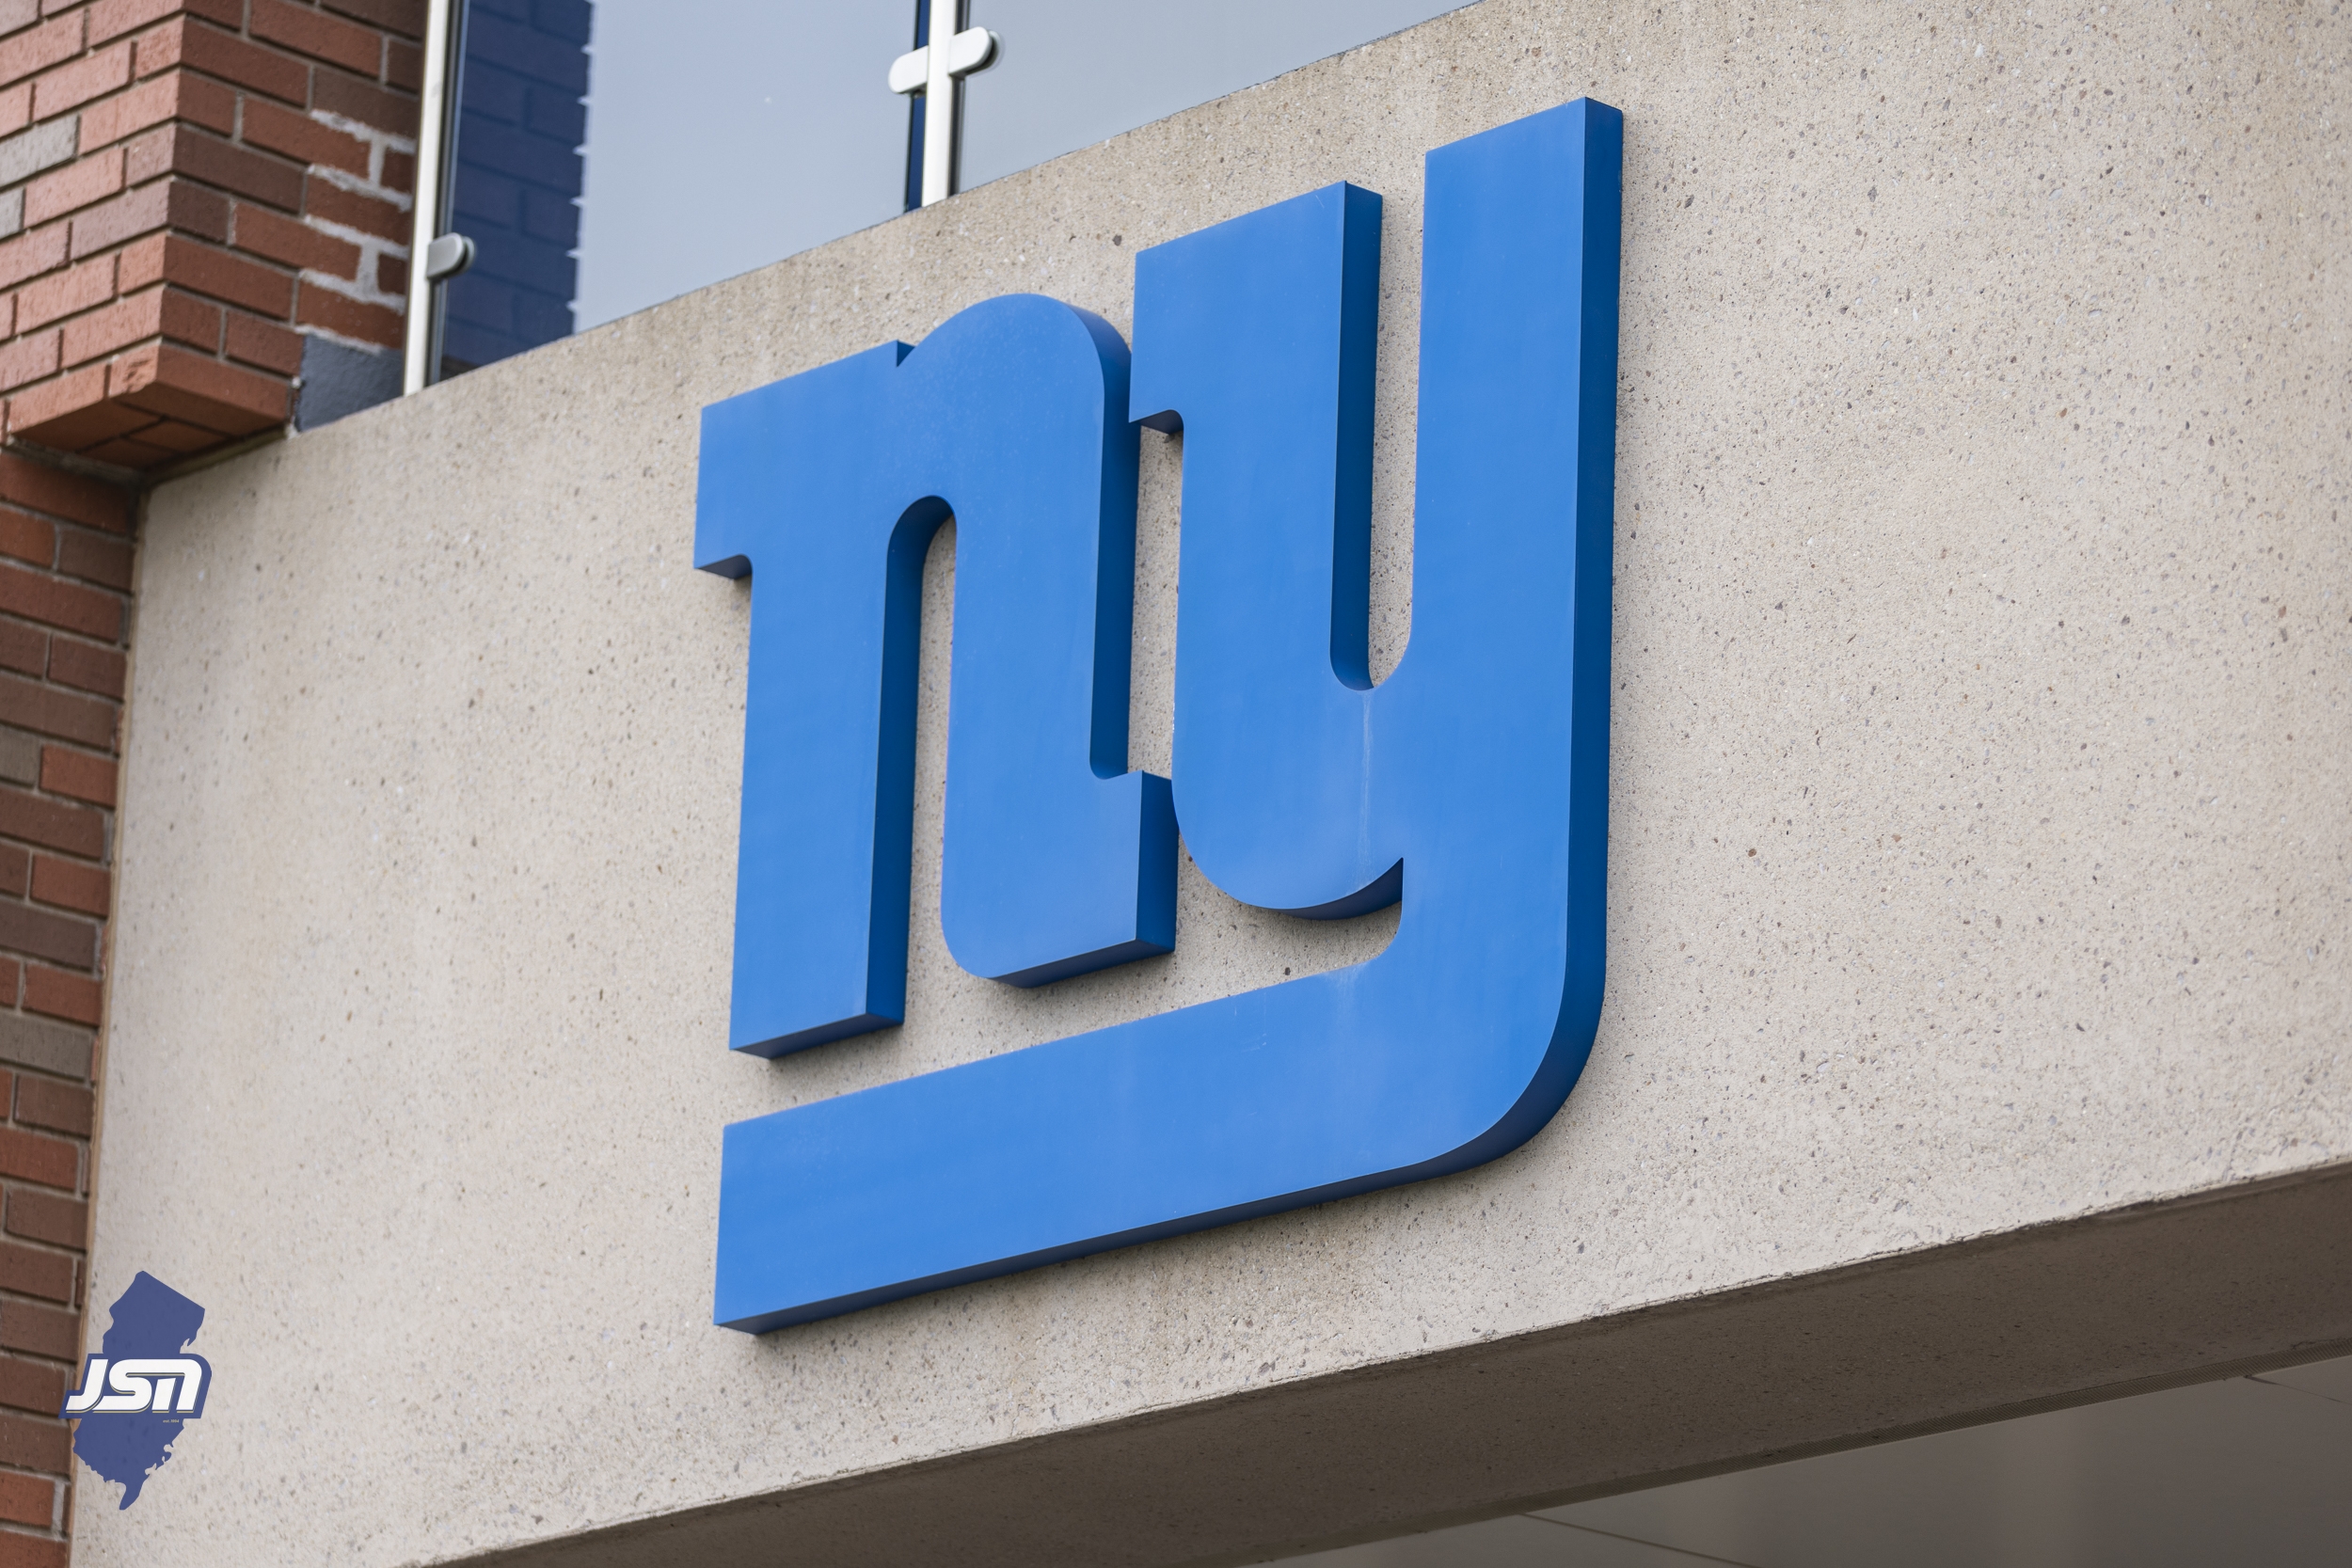 NFL on ESPN - The New York Giants have been eliminated from